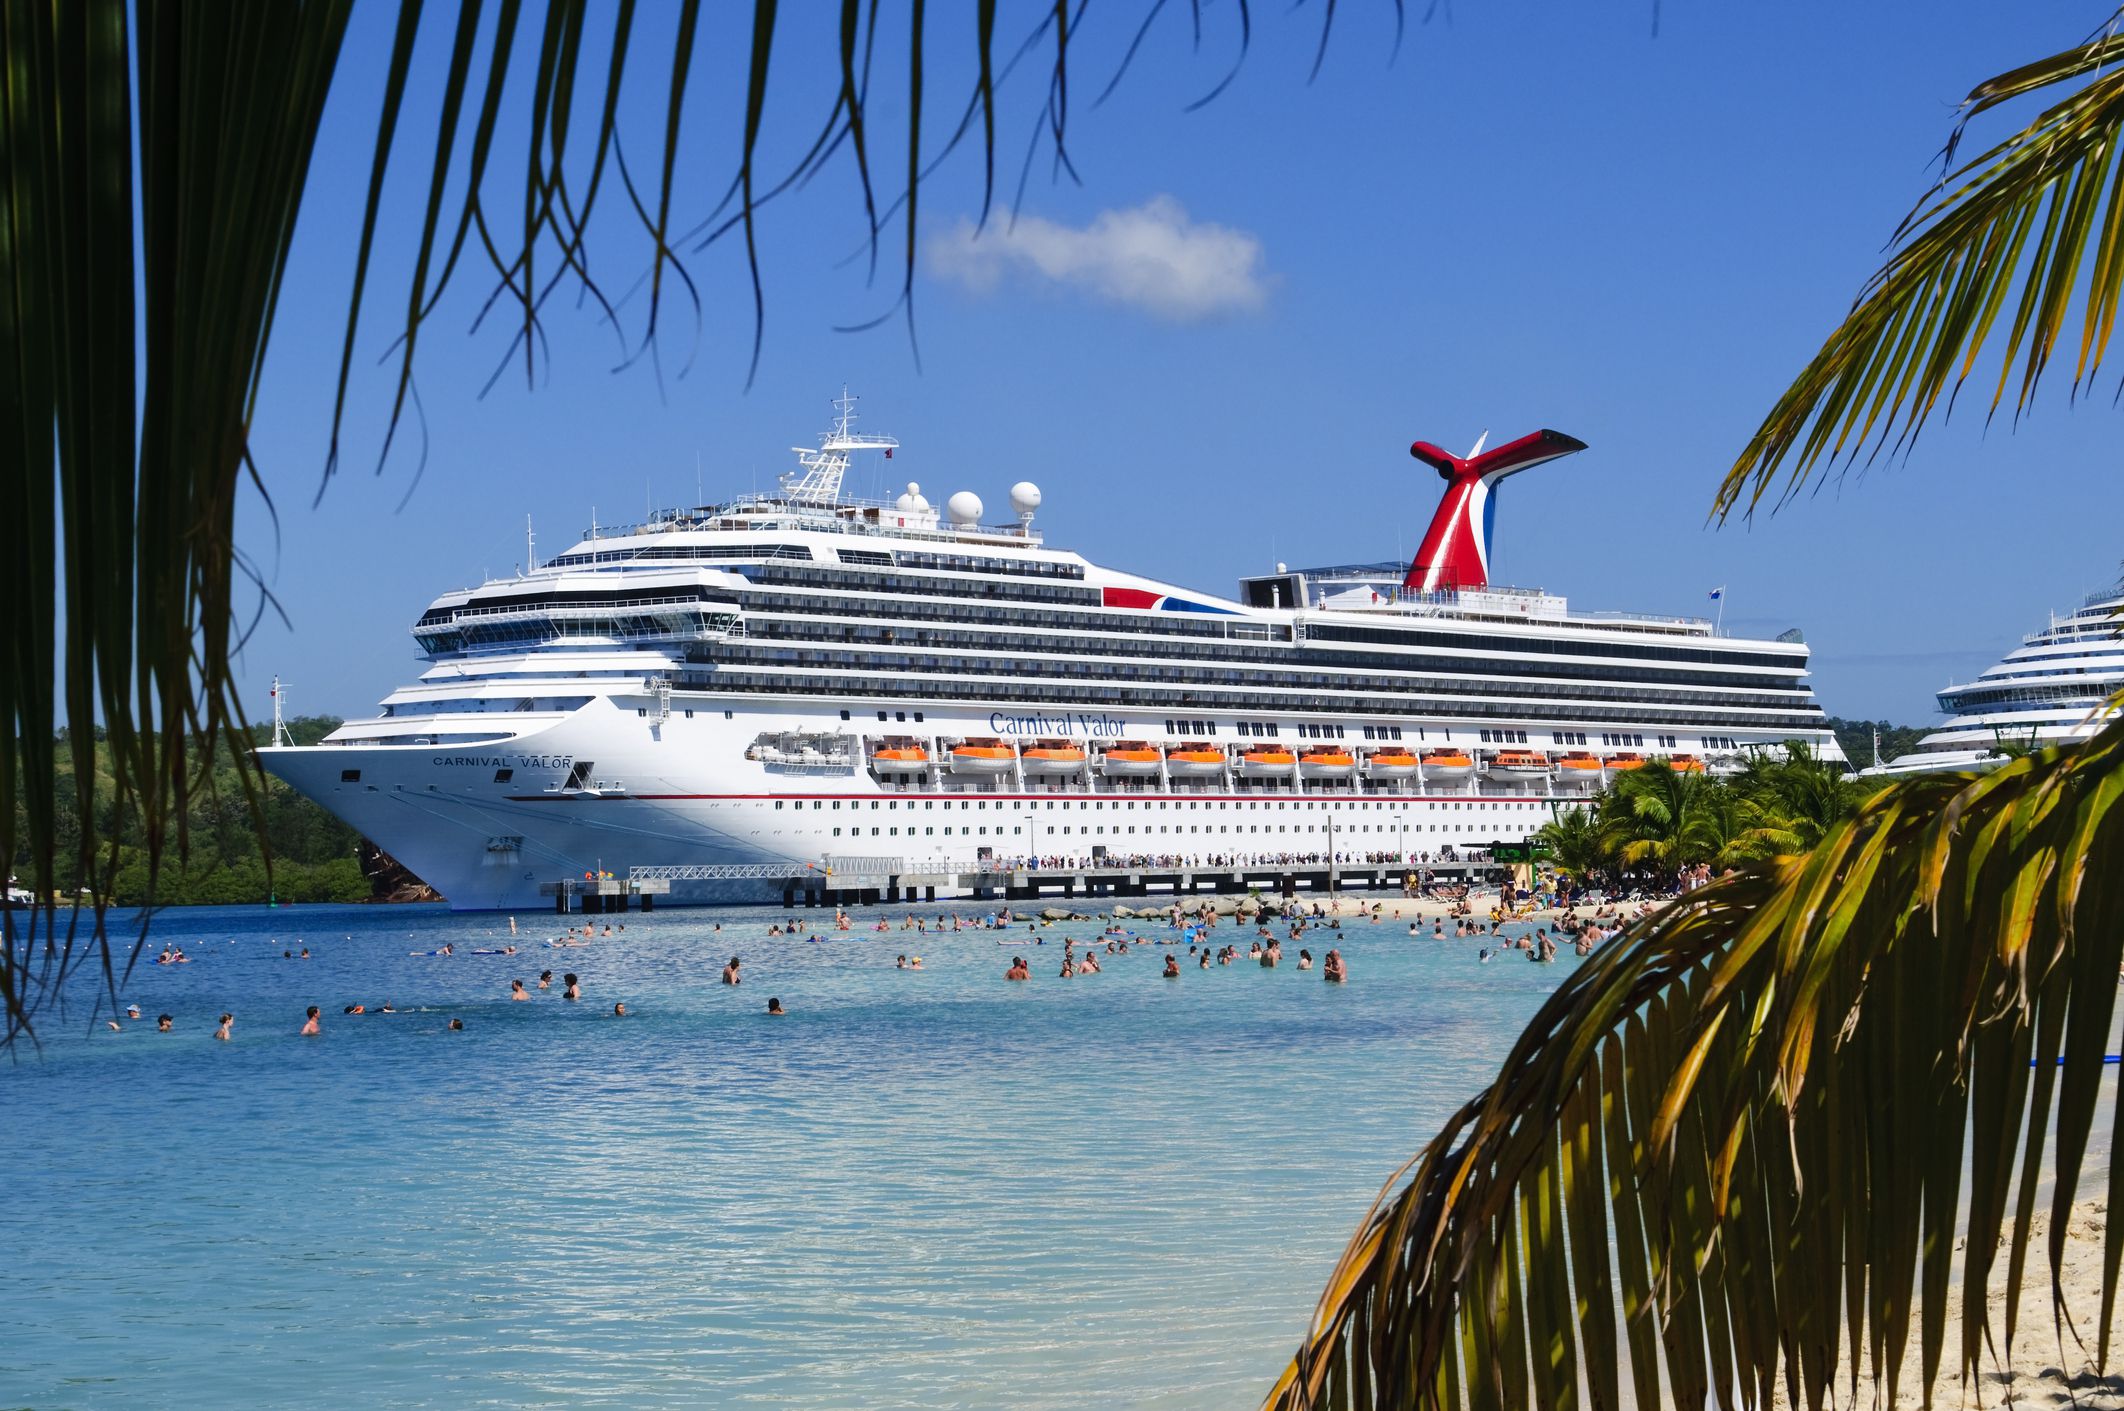 <p>Despite Carnival's reputation as a low-cost cruise line, Redditors say that it’s worth paying a bit extra for Norwegian, which has a better “cost-to-enjoyment” ratio. “Carnival might offer some of the best prices, but they might not offer the kind of experience or atmosphere that you're looking for,” one comment reads.</p>